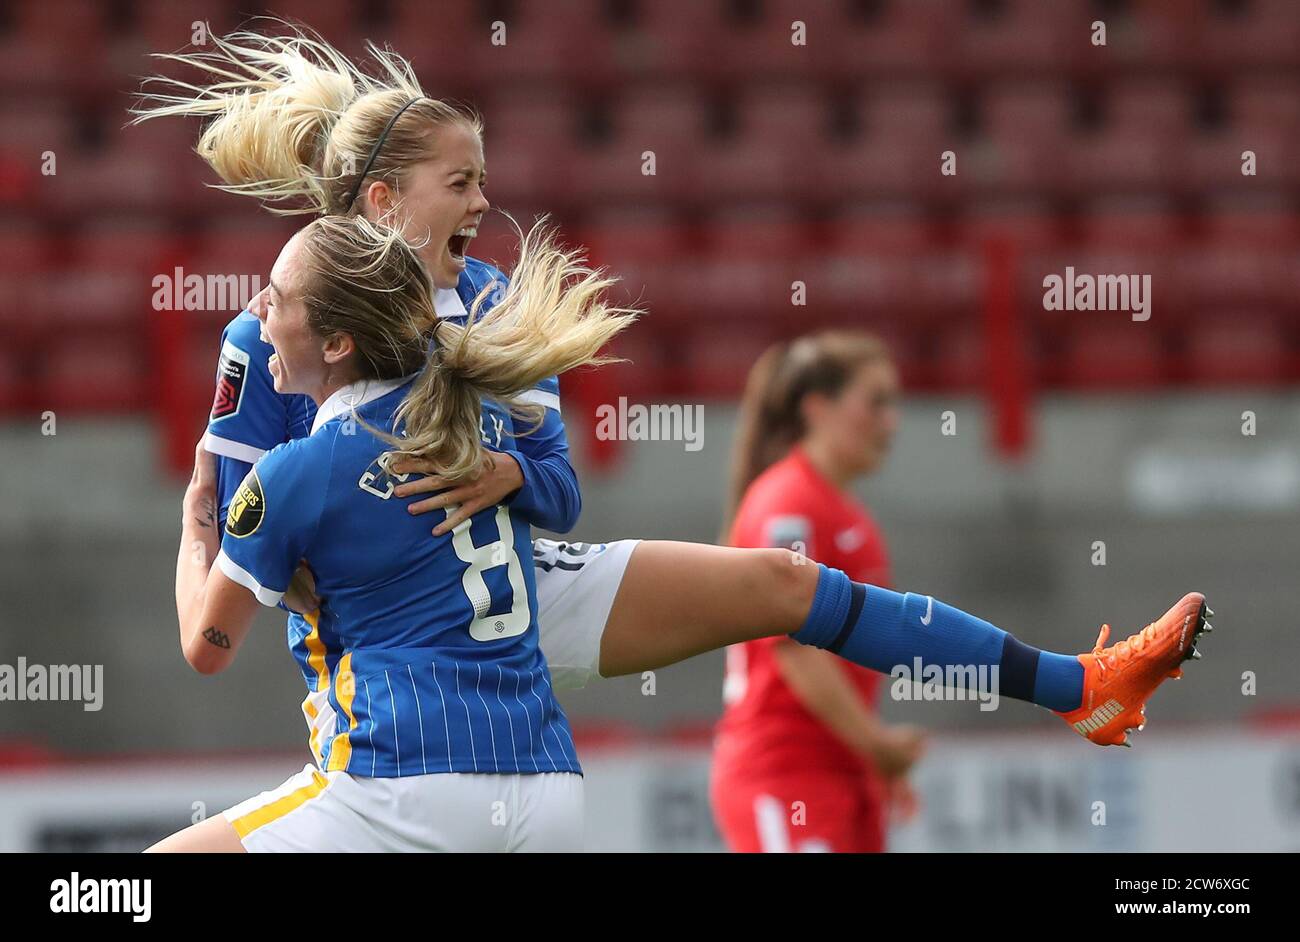 Brighton's goal scorer Denise O'Sullivan celebrates scoring the equaliser 2-2 with Brighton's Megan Connolly during the Vitality WomenÕs FA Cup quarter-final match between Brighton & Hove Albion Women and Birmingham City Women at the PeopleÕs Pension Stadium in Crawley . 27 September 2020 Stock Photo